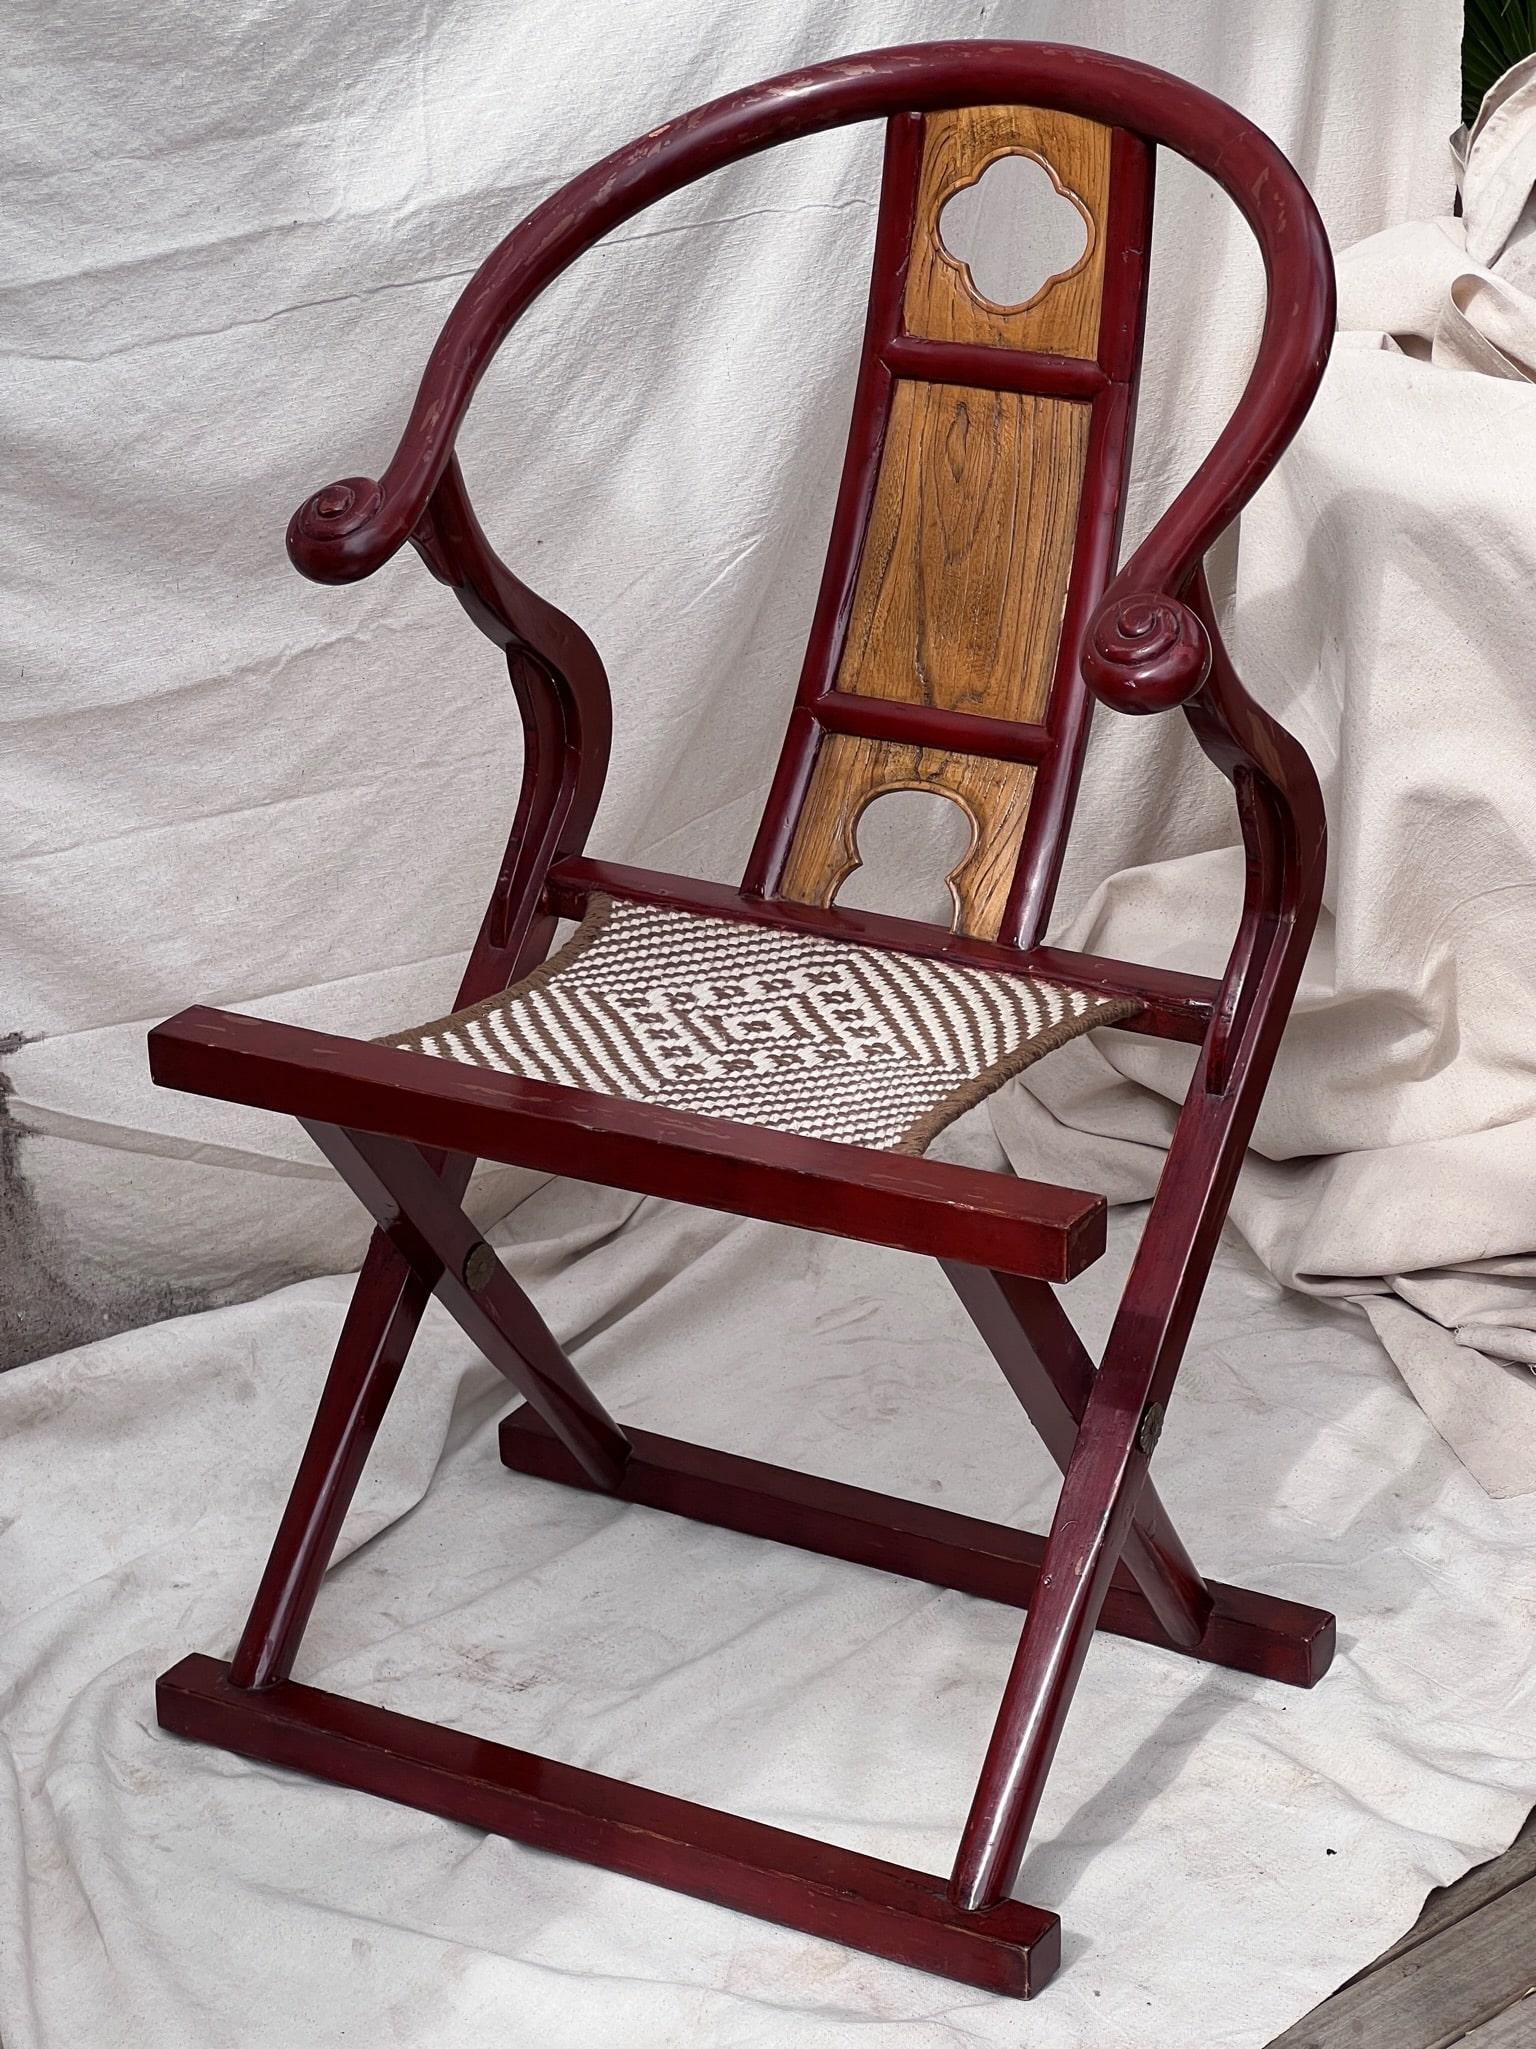 Introducing the 19th-century Vintage in the Style of Chinese Horseshoe Wooden Folding Chairs. Chinese Horseshoe Chairs initially crafted as seats of distinction, were exclusively reserved for individuals of paramount importance and courtly